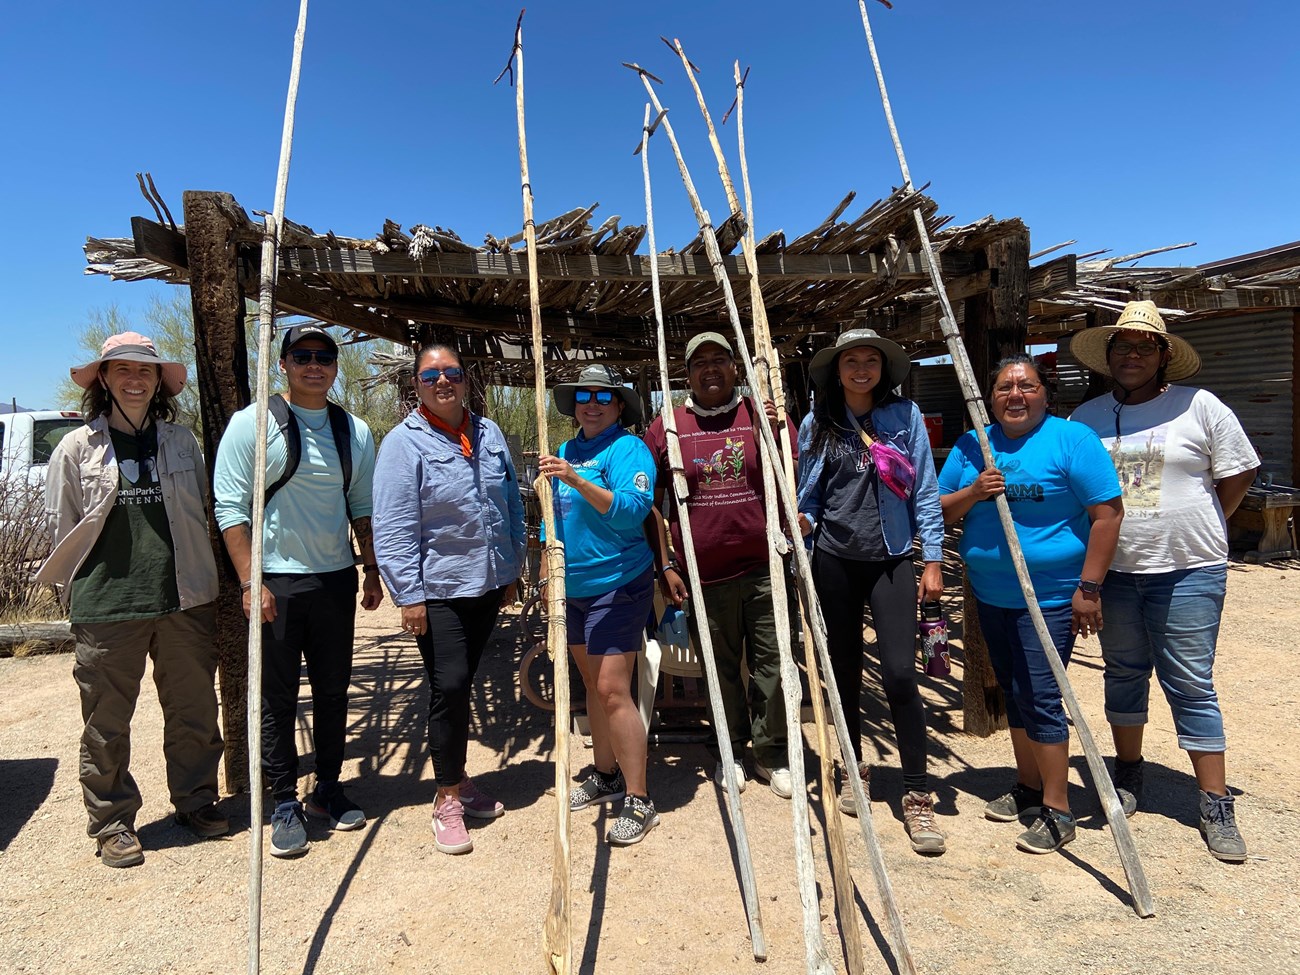 group of people with saguaro fruit gathering poles (kuipuds)